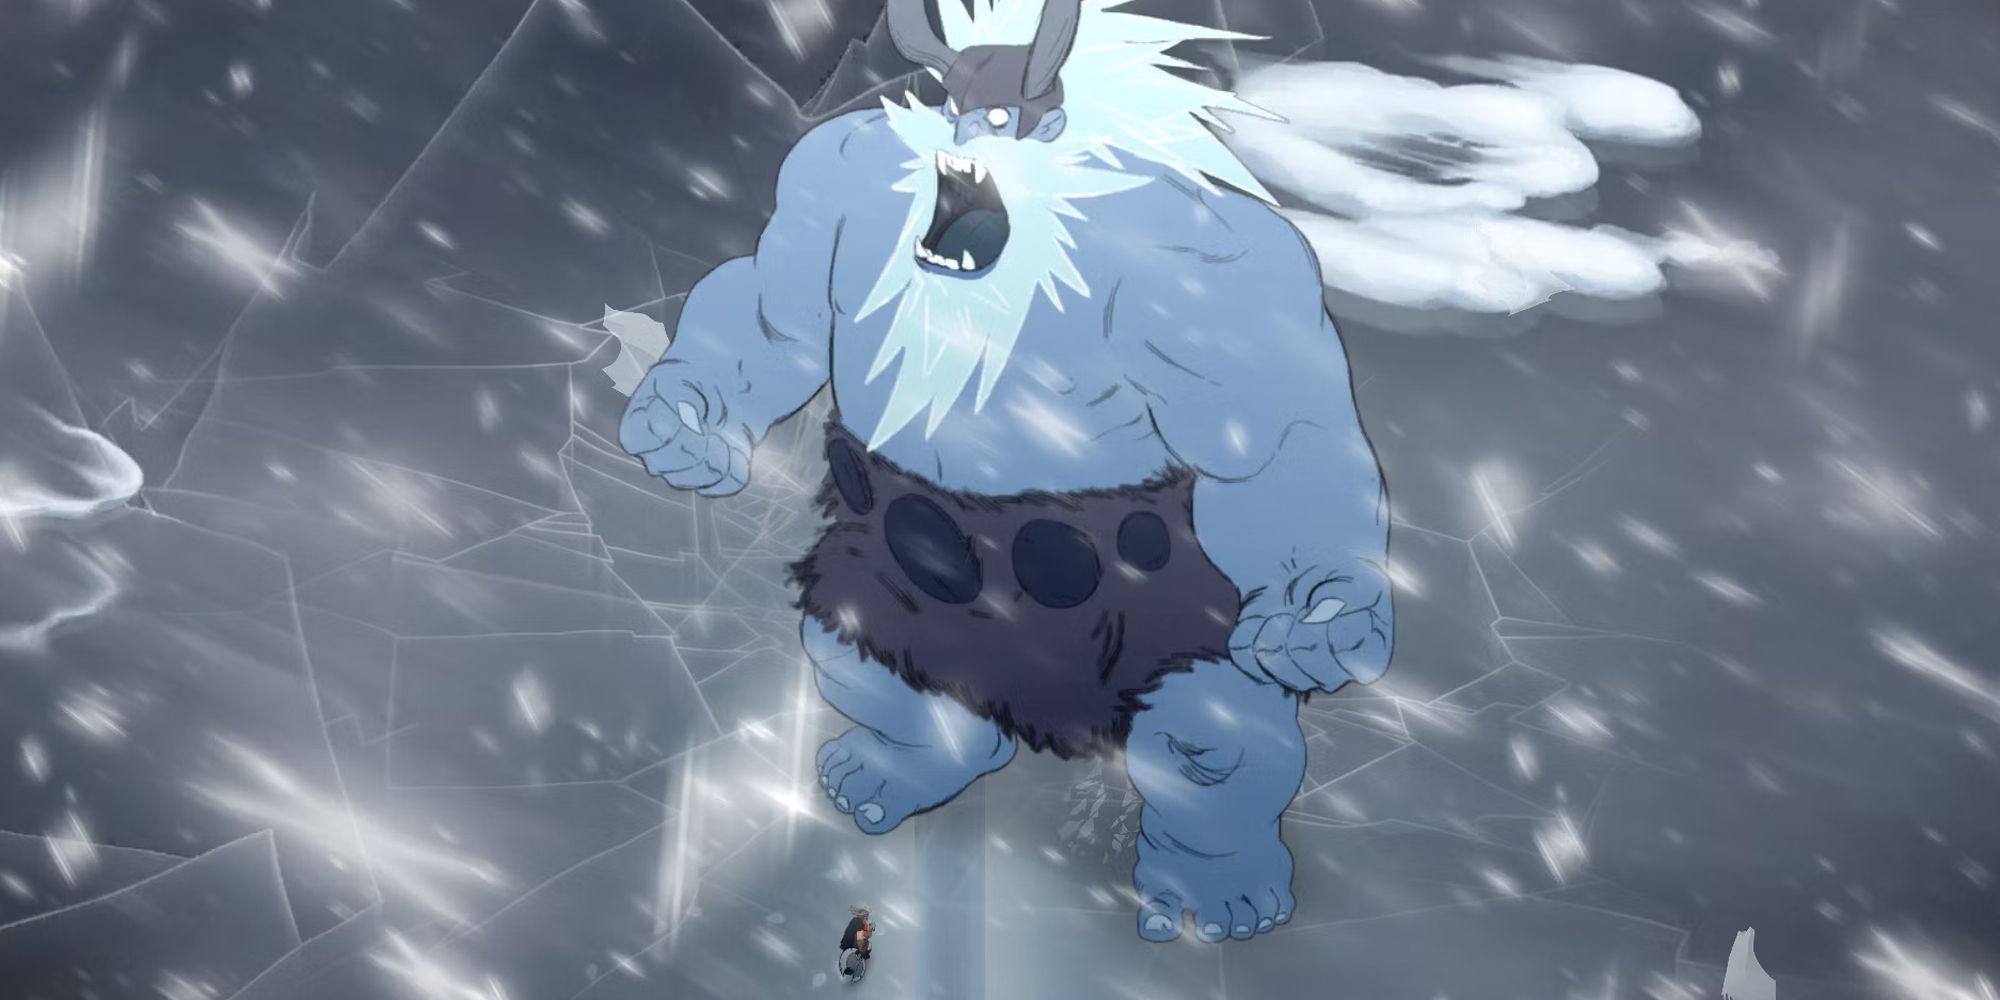 The blue giant Jotun roaring before the main character in a snowy environment.